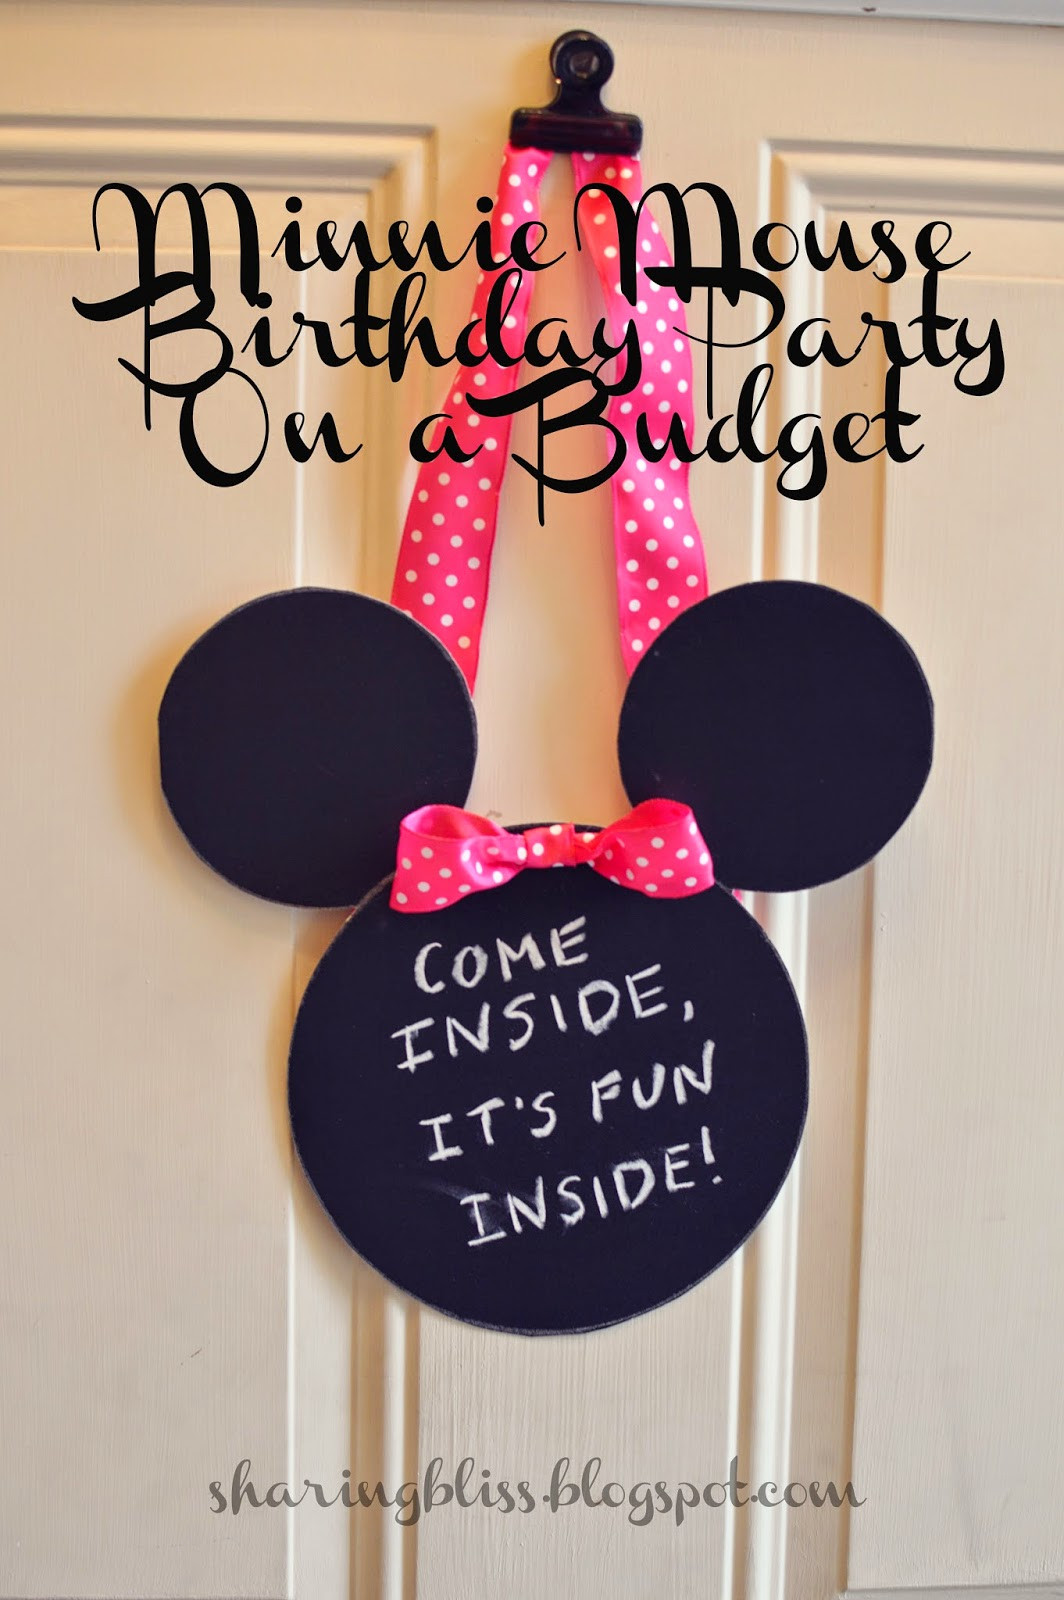 Minnie Mouse 2nd Birthday Party
 Minnie Mouse Birthday Party on a Bud